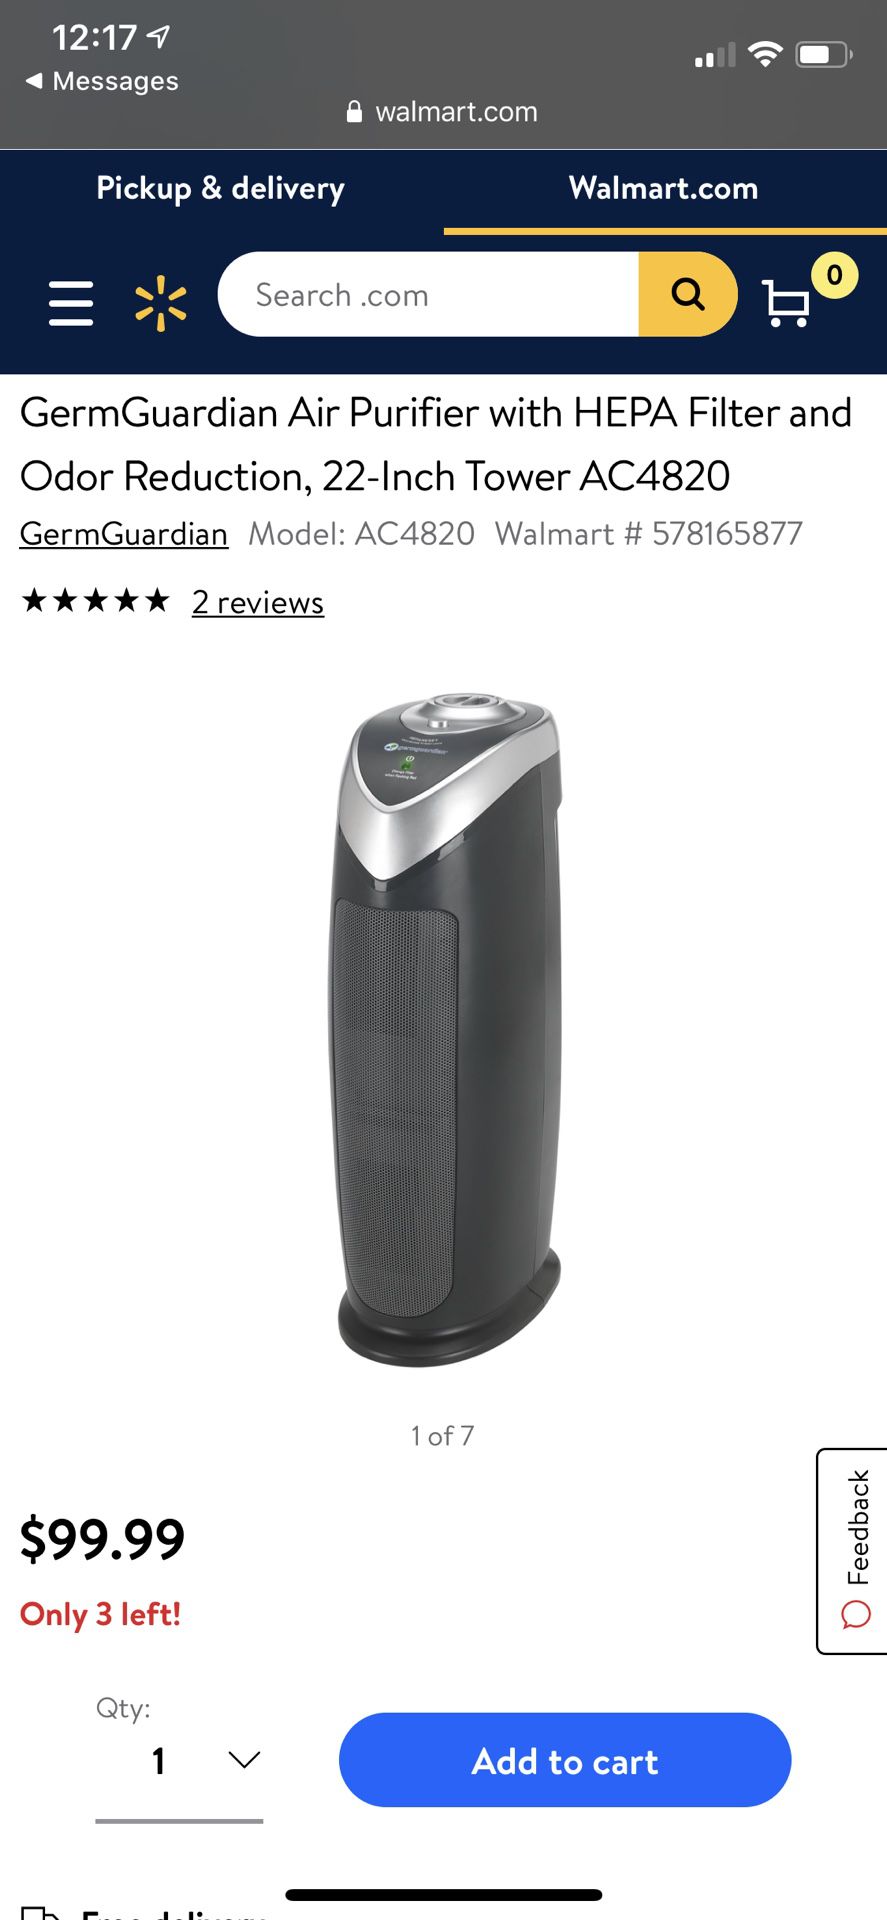 GermGardian Air Purifier with HEPA Filter and Odor Reduction, 22-inch Tower AC4820 - still in great condition!